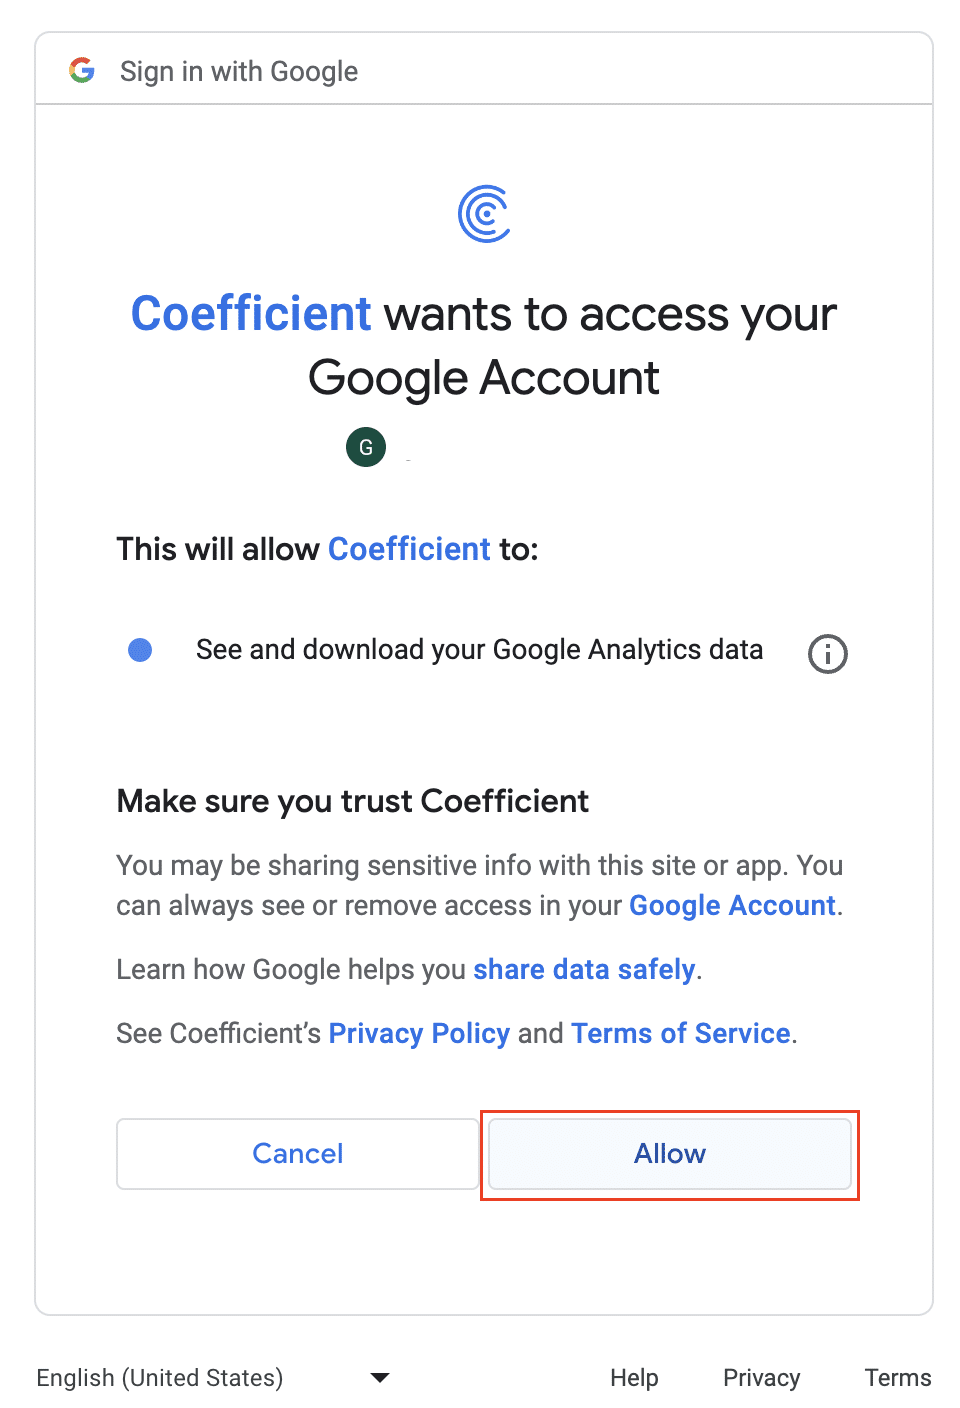 Authorizing Coefficient access to Google Account for GA4 data